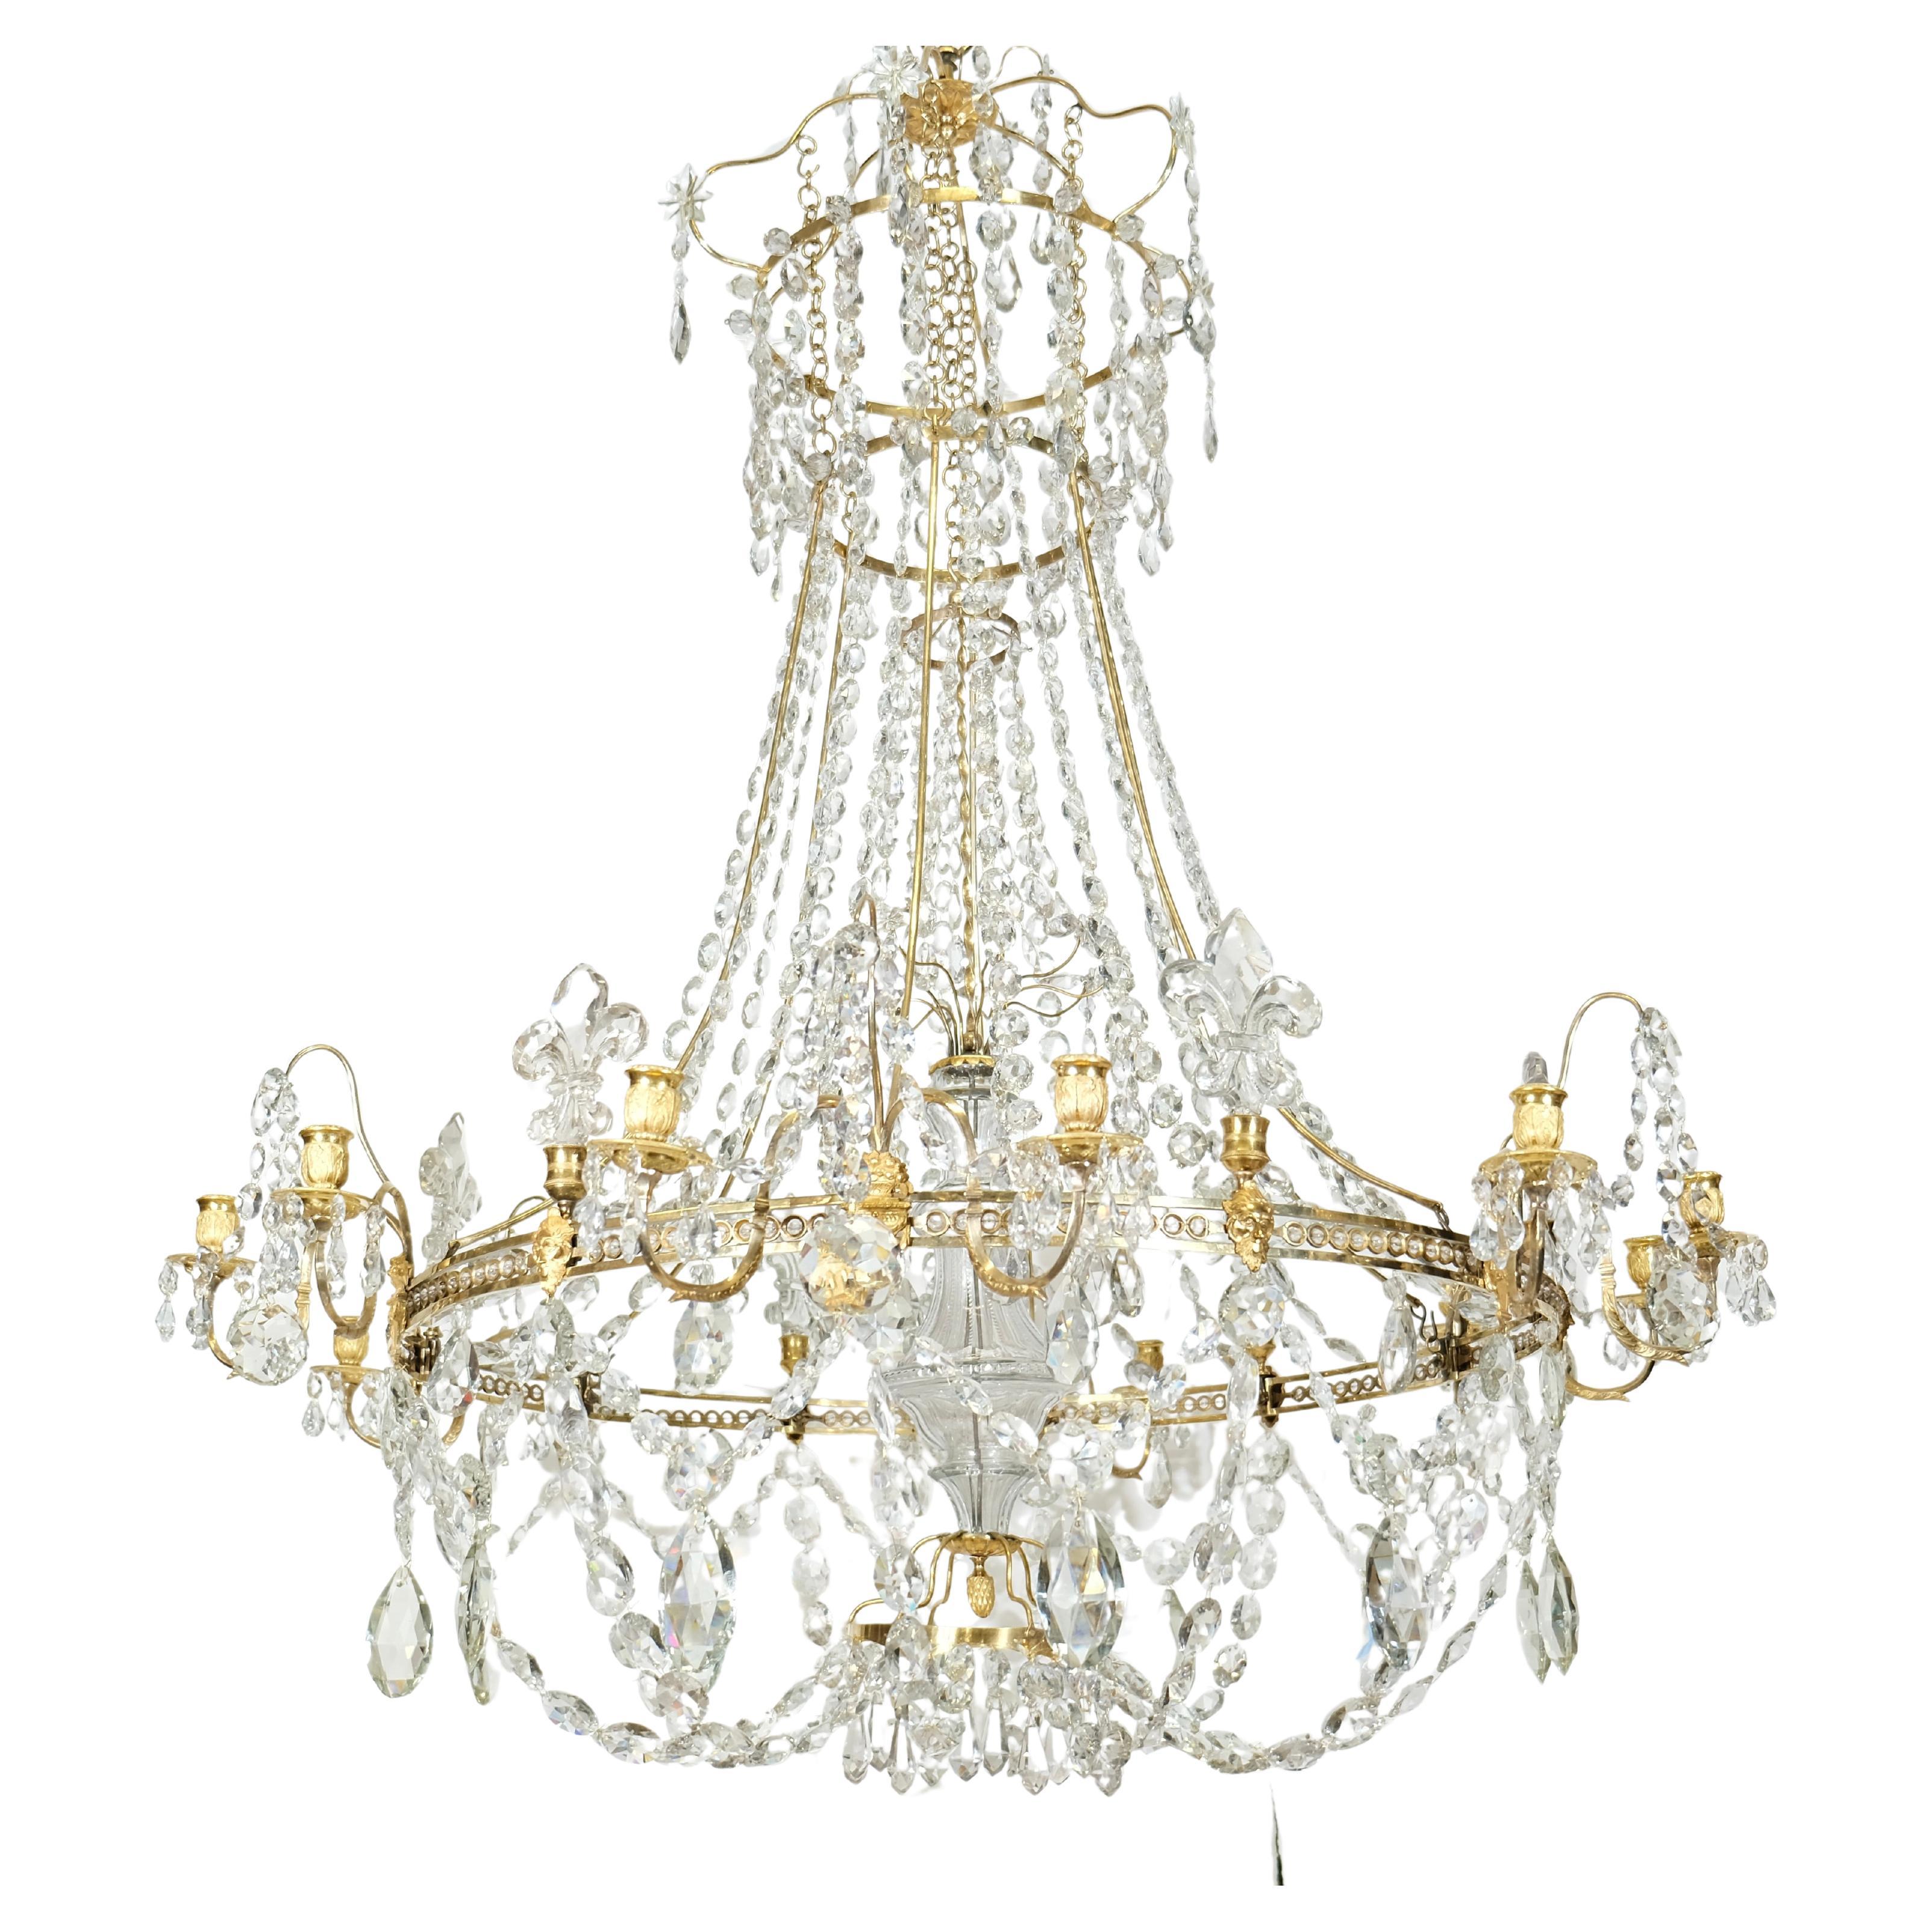 Magnificent Antique Important and large 18th c chandelier